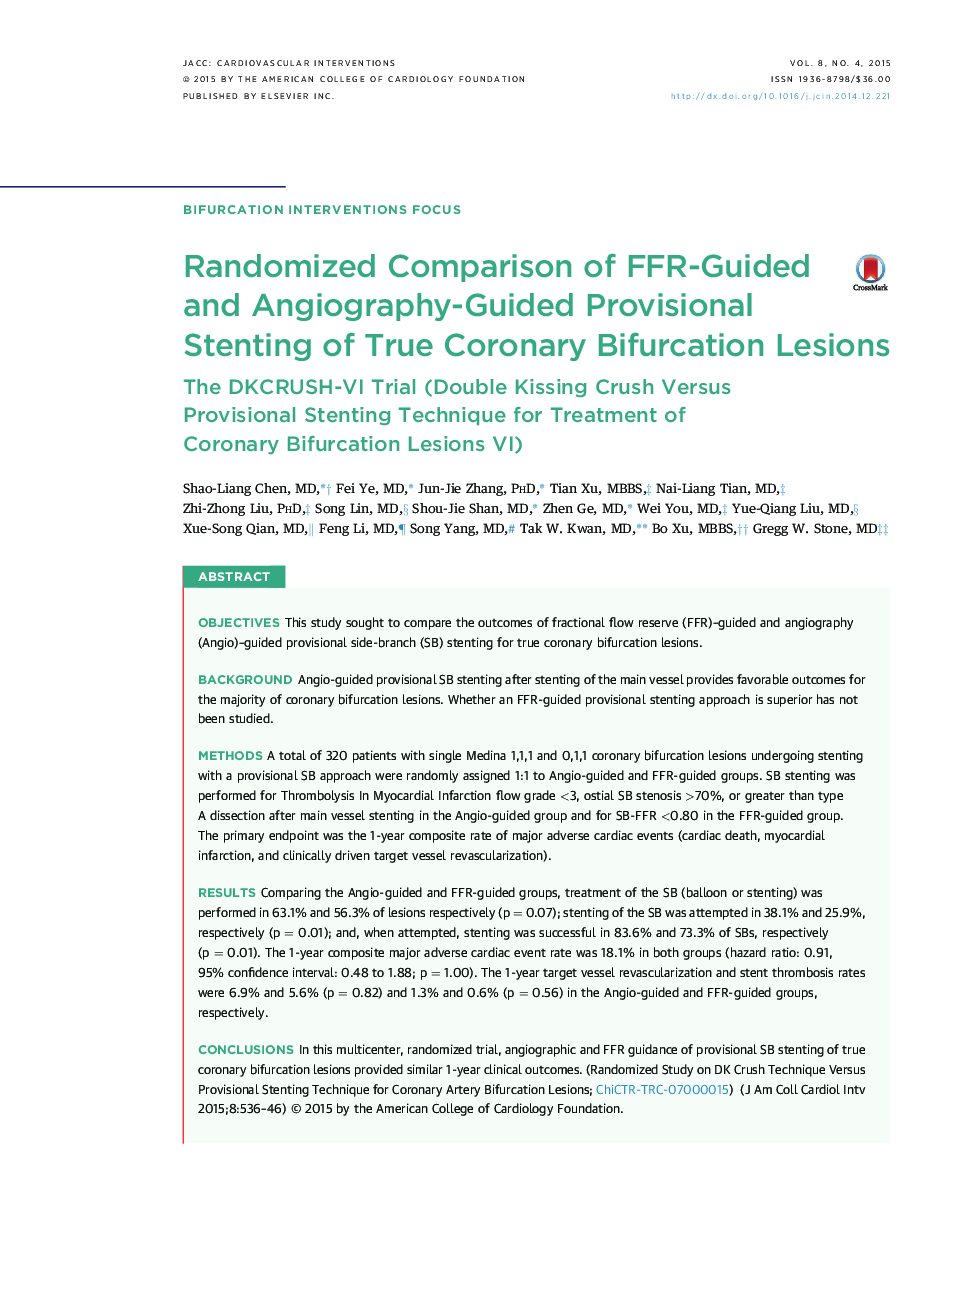 Randomized Comparison of FFR-Guided and Angiography-Guided Provisional Stenting of True Coronary Bifurcation Lesions : The DKCRUSH-VI Trial (Double Kissing Crush Versus Provisional Stenting Technique for Treatment of Coronary Bifurcation Lesions VI)